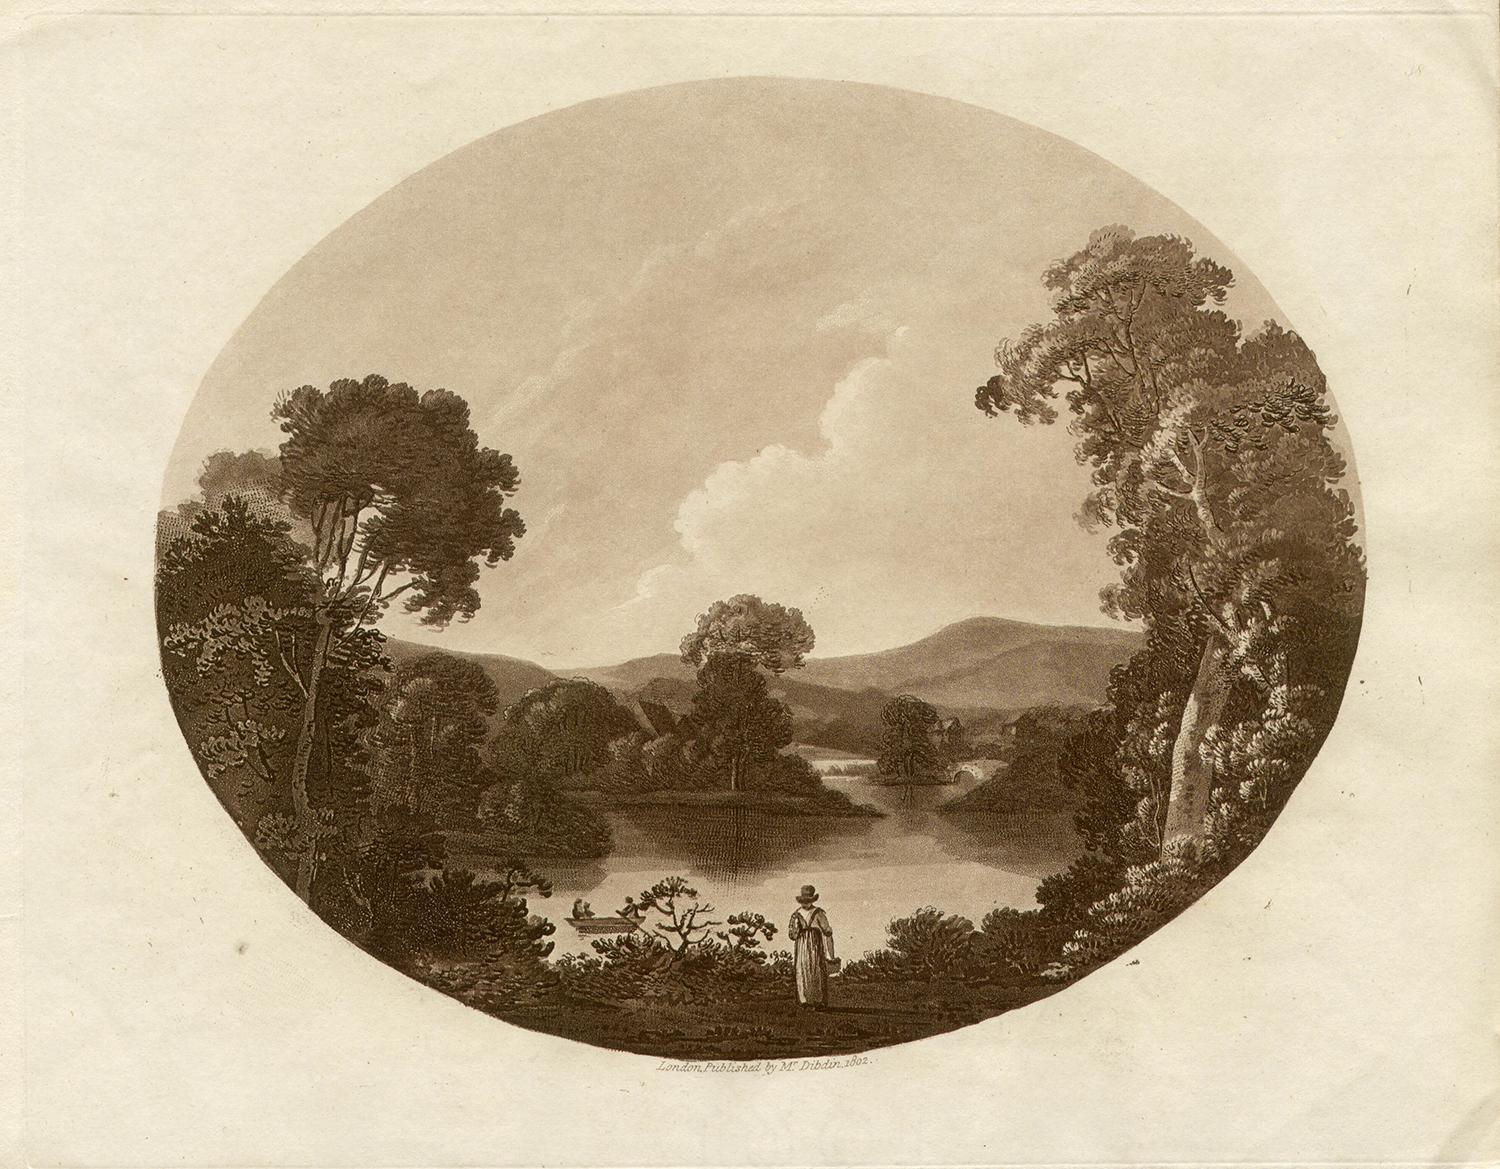 From Dibdin's 'Observations on a tour'. Charles Dibdin the elder was a famed singer, songwriter, and actor who spent a significant amount of time touring the countryside. During this time he produced a series of charming picturesque aquatints